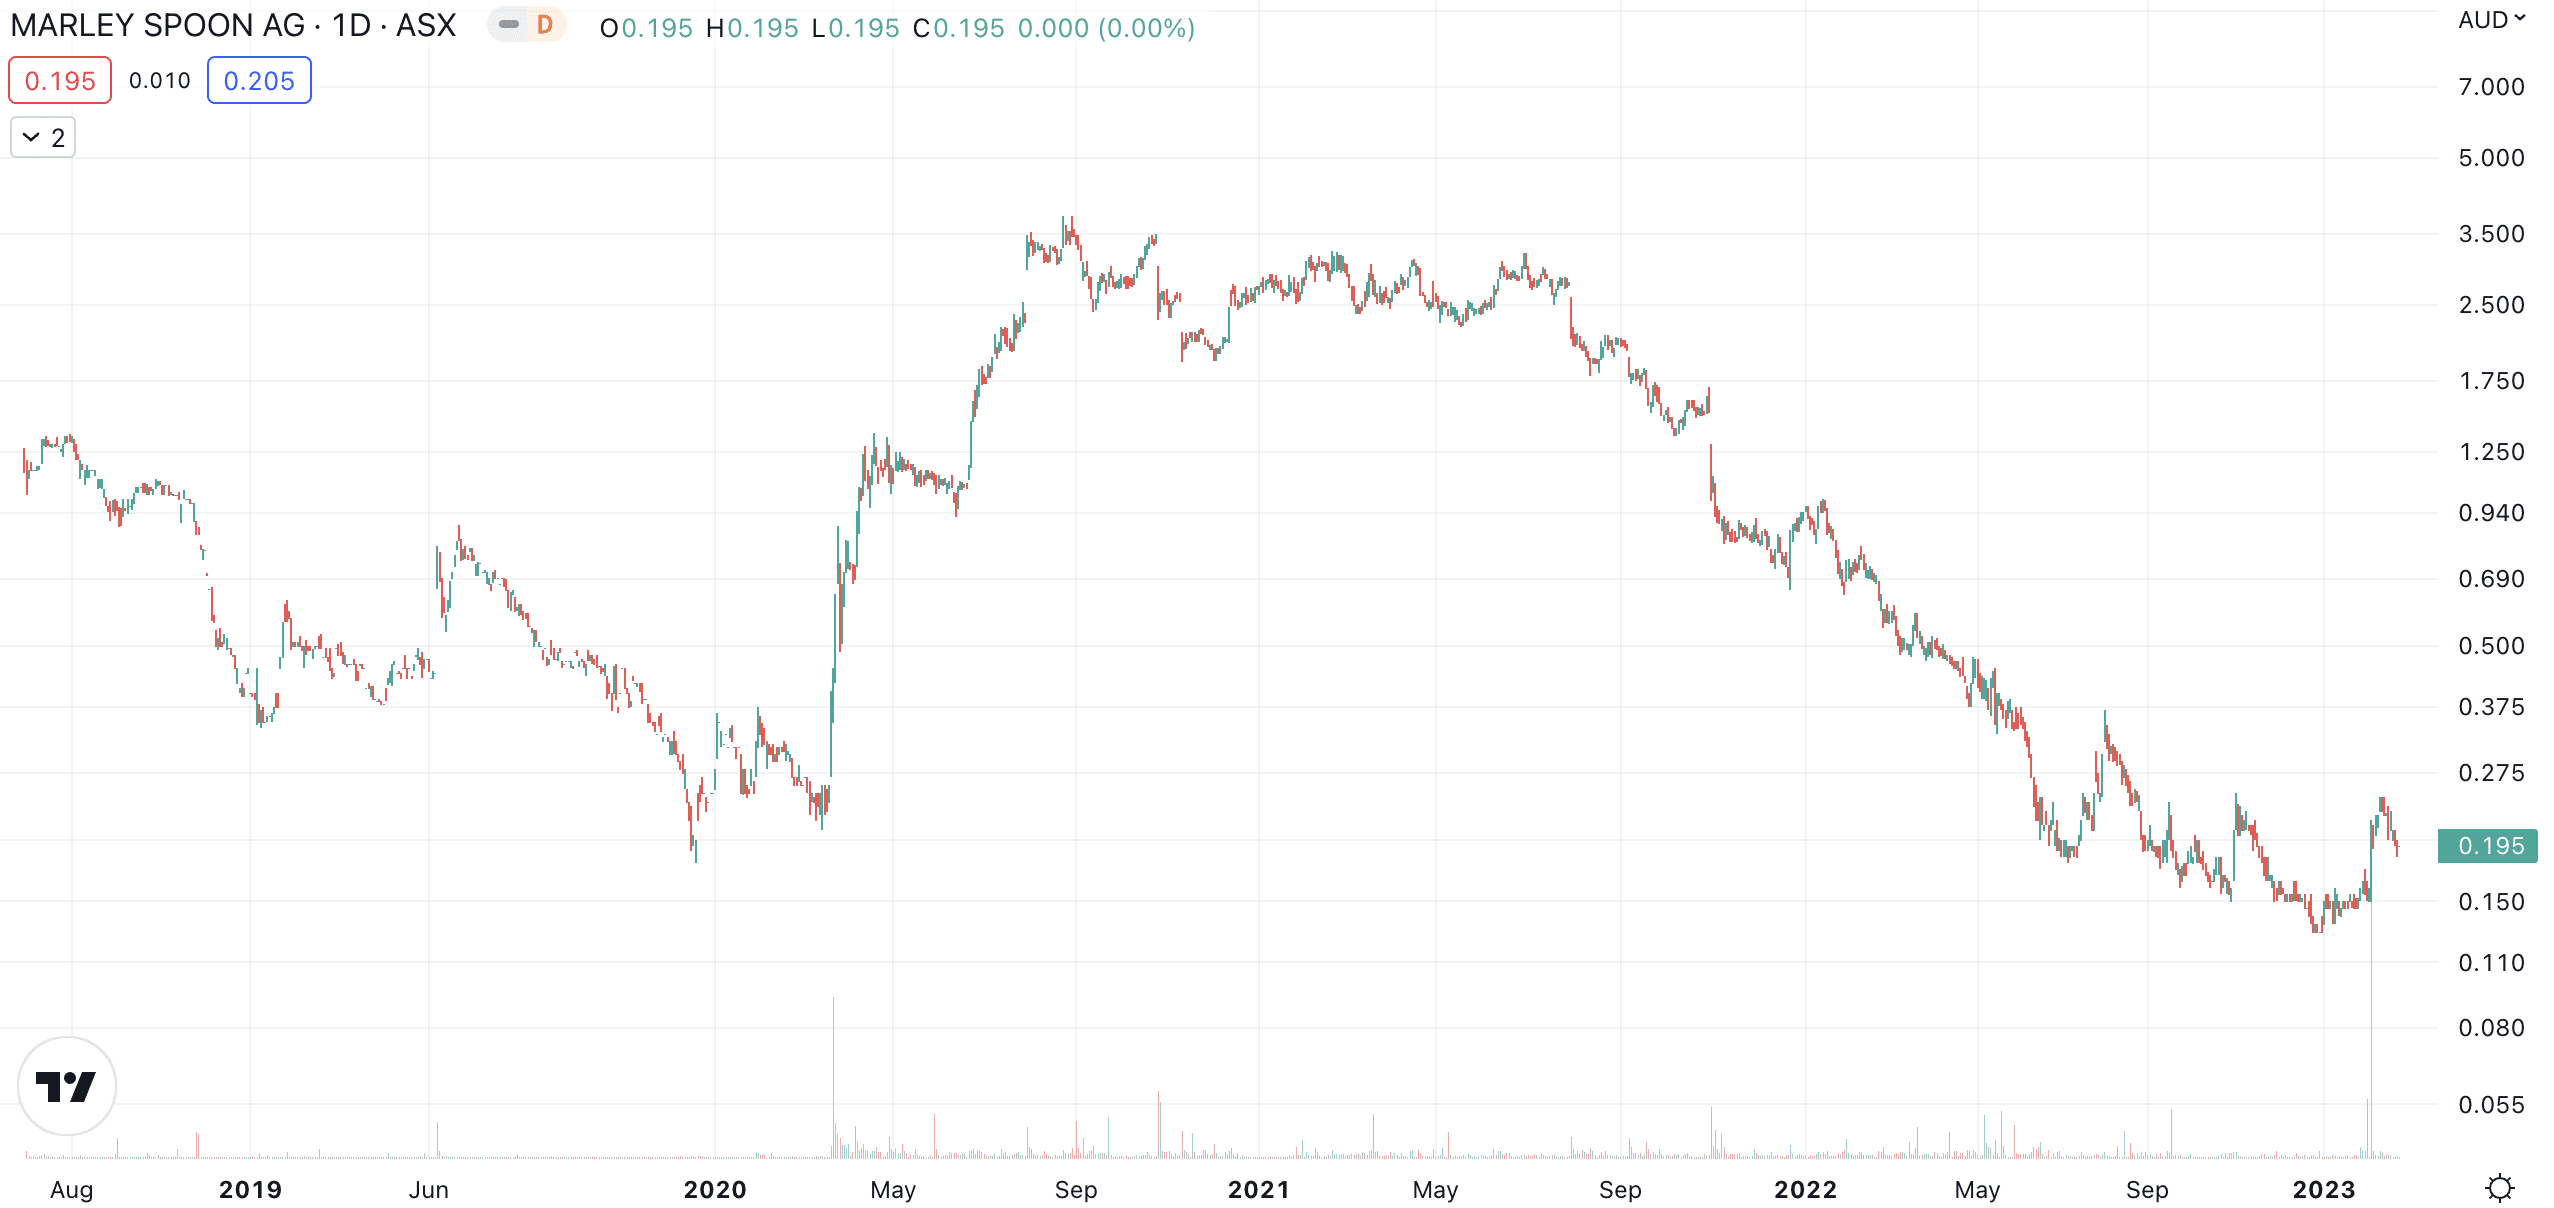 Marley Spoon making a disillusioned exit from the ASX 1